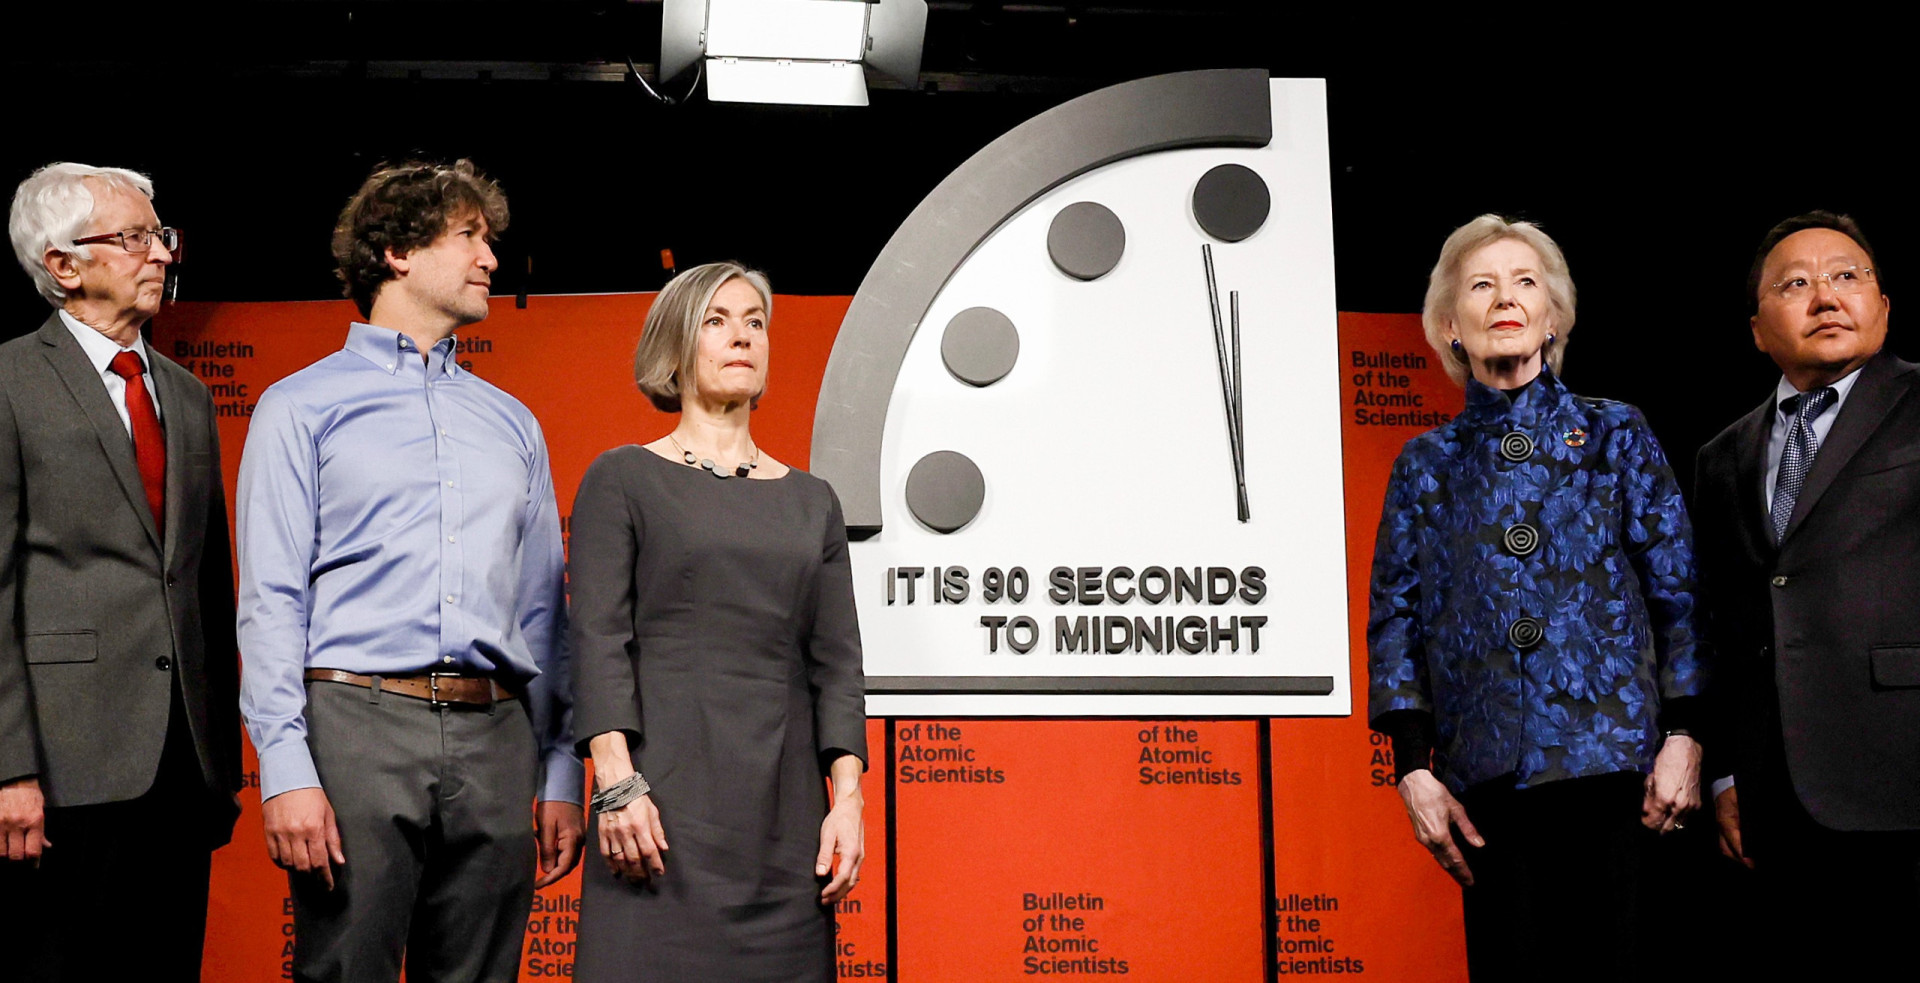 <p>In 2023, the clock was moved 10 seconds closer to midnight, leaving us just 90 seconds away from doomsday. This was in response to Russia's attack on Ukraine and the imminent threat of nuclear war. “We are sending a message that the situation is becoming more urgent,” said Rachel Bronson, President of the Bulletin of Atomic Scientists. "Crises are more likely to happen and have broader consequences and longer standing effects.” Other threats to humanity mentioned included "nuclear weapon proliferation in China, Iran increasing its uranium enrichment, missile tests in North Korea, future pandemics from animal diseases, pathogens from lab mistakes, “disruptive technologies,” and worsening climate change."</p> <p>Sources: (BBC) (Bulletin of the Atomic Scientists) (CTBTO)</p> <p>See also: <a href="https://www.starsinsider.com/travel/354889/after-chernobyl-meet-the-ukrainian-ghost-city">After Chernobyl: meet the Ukrainian ghost city</a></p><p><a href="https://www.msn.com/en-us/community/channel/vid-7xx8mnucu55yw63we9va2gwr7uihbxwc68fxqp25x6tg4ftibpra?cvid=94631541bc0f4f89bfd59158d696ad7e">Follow us and access great exclusive content every day</a></p>